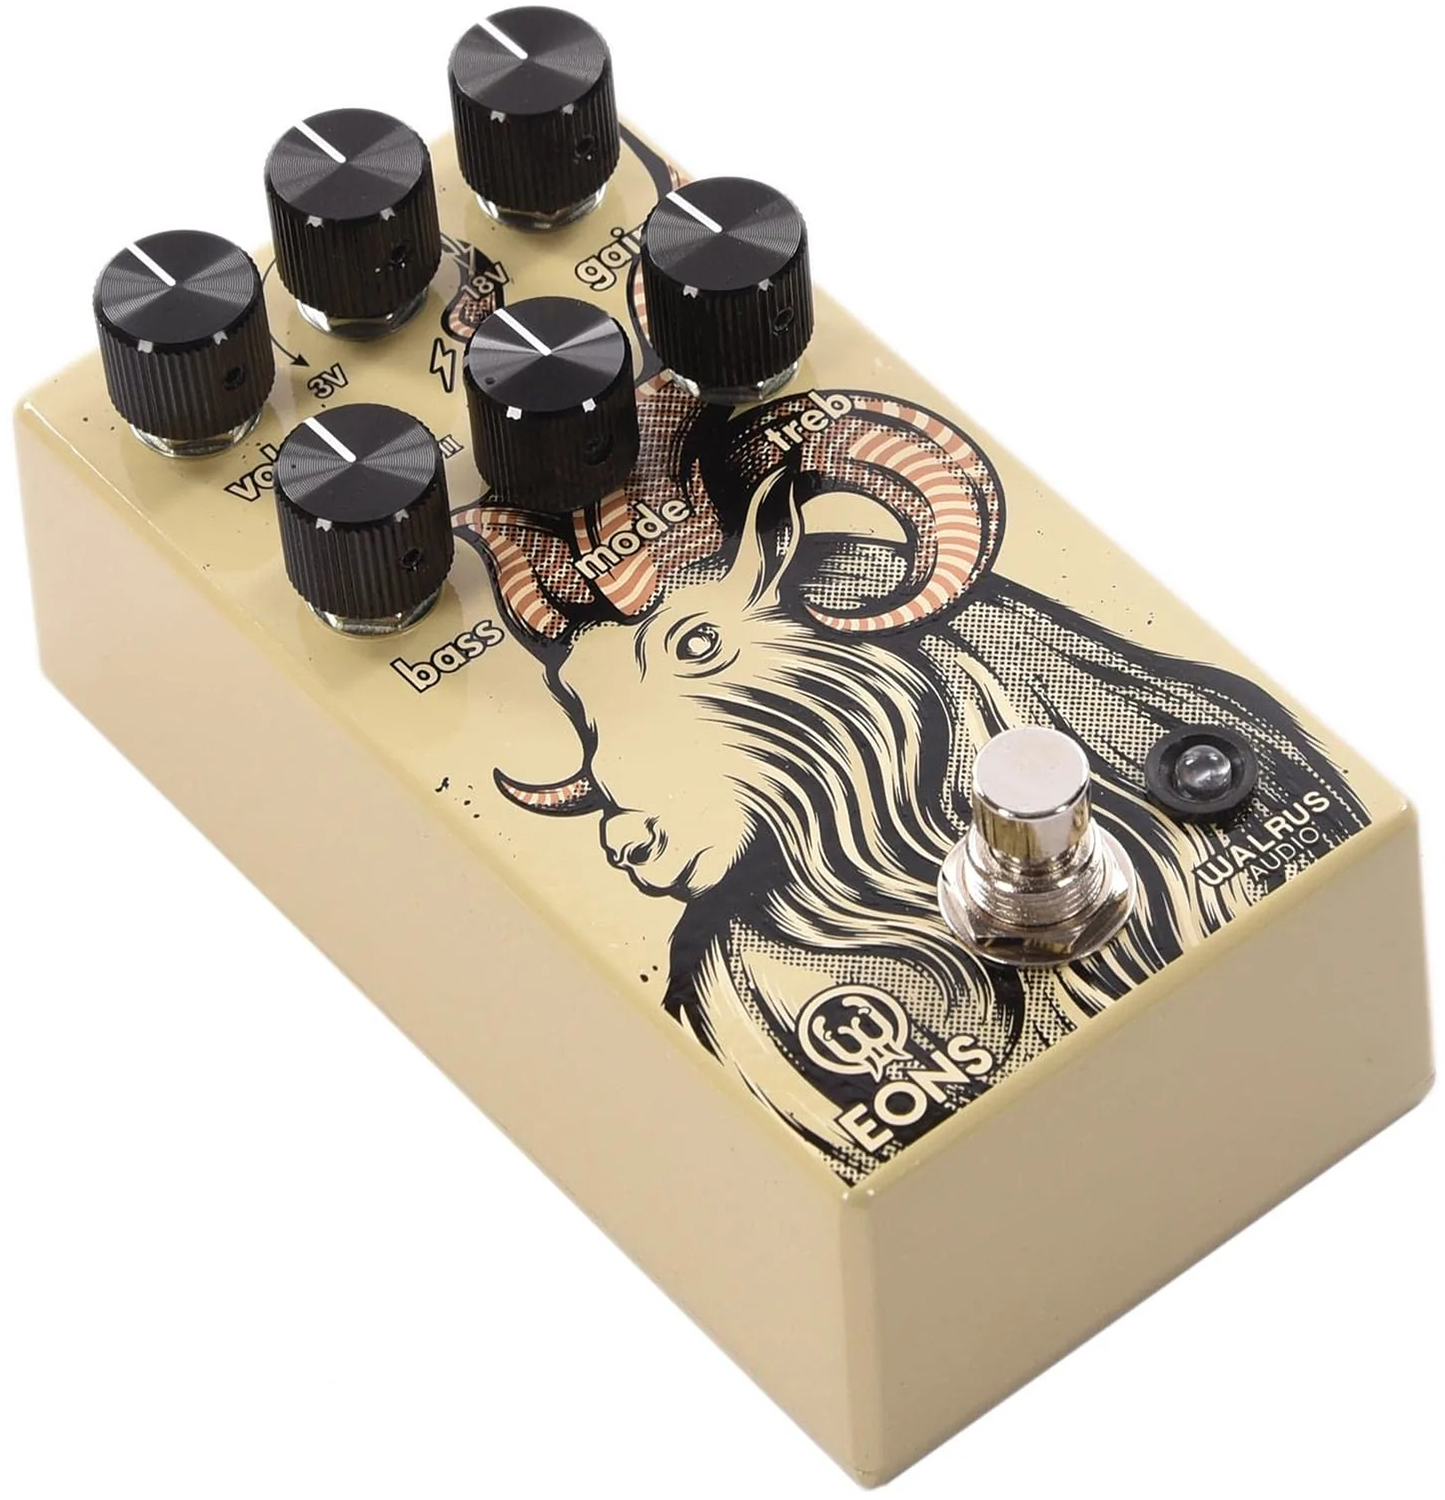 Walrus Eons Five-state Fuzz - Overdrive, distortion & fuzz effect pedal - Variation 1